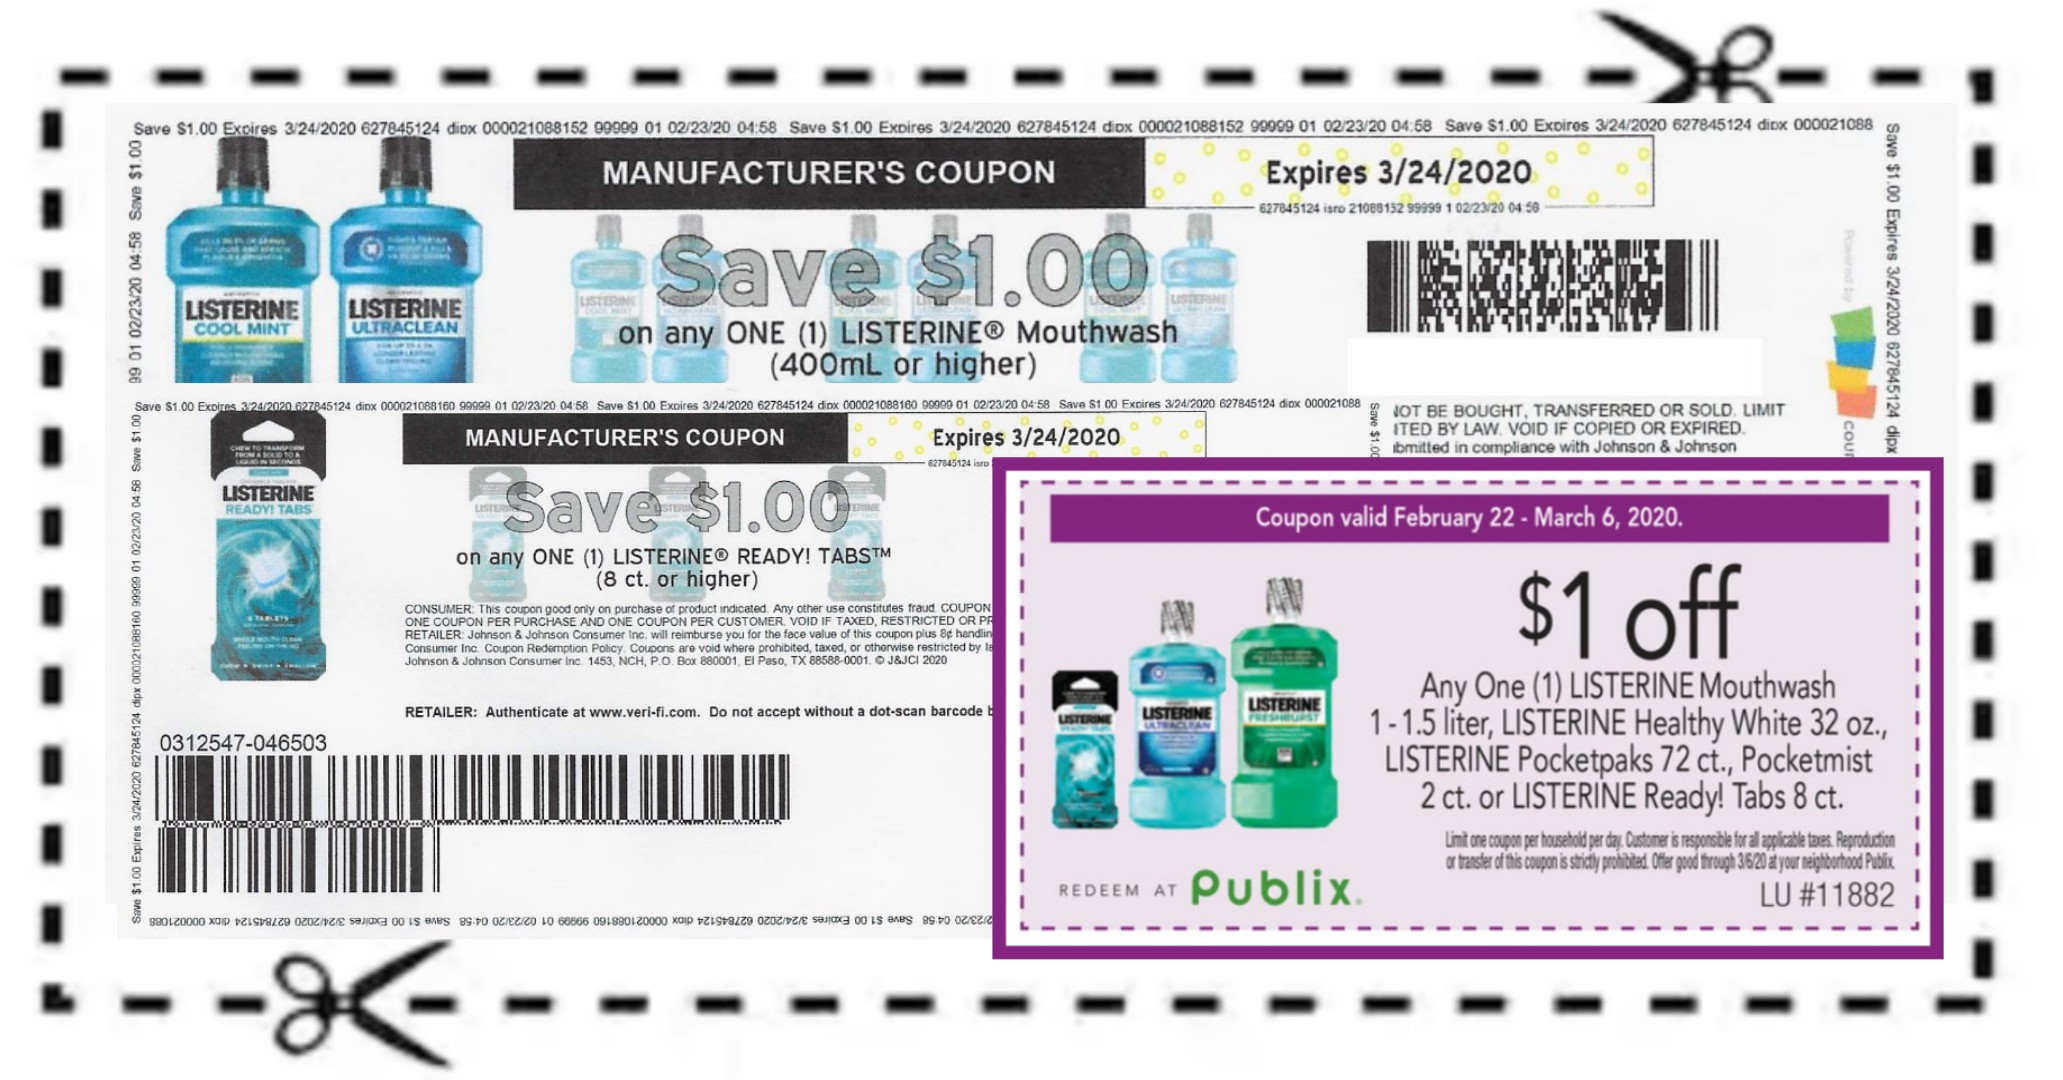 2 New Listerine Coupons 1/1 Publix Coupon to Stack